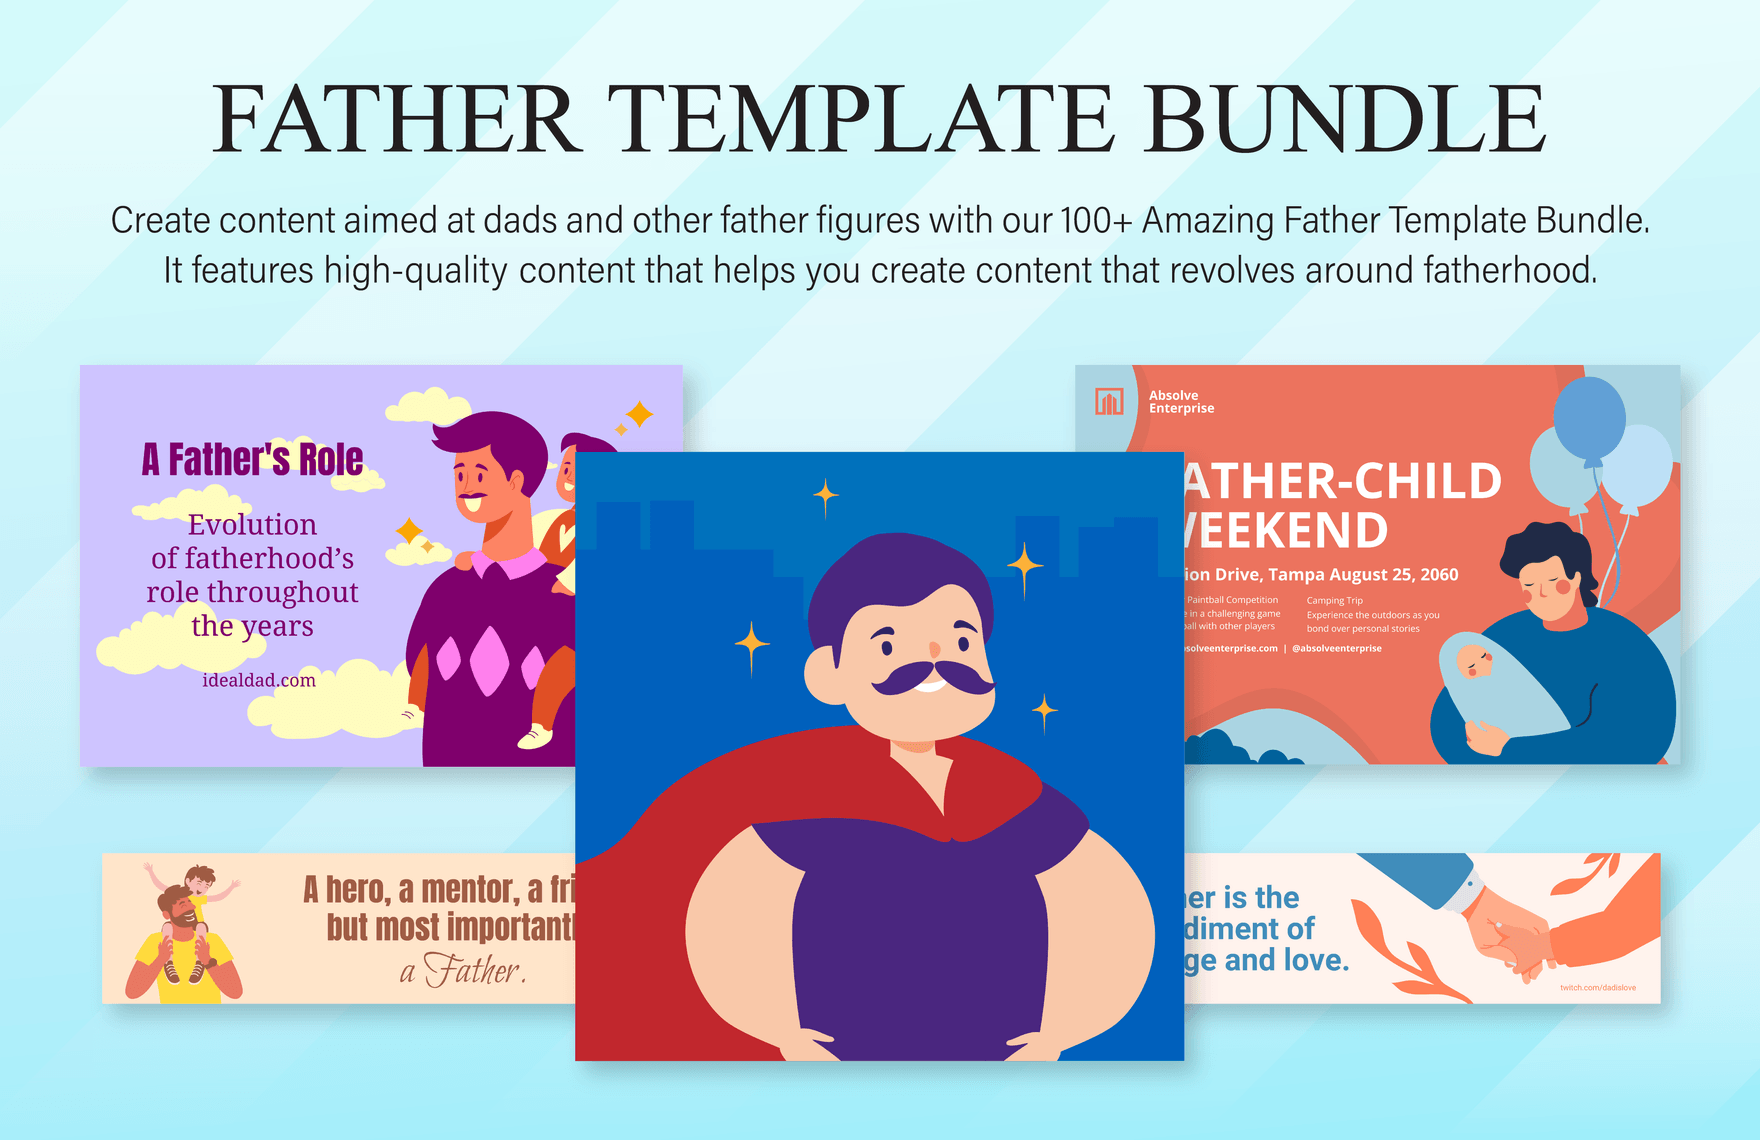 Free 50 Amazing Father Template Bundle in Word, Google Docs, Illustrator, PSD, EPS, SVG, PNG, JPEG